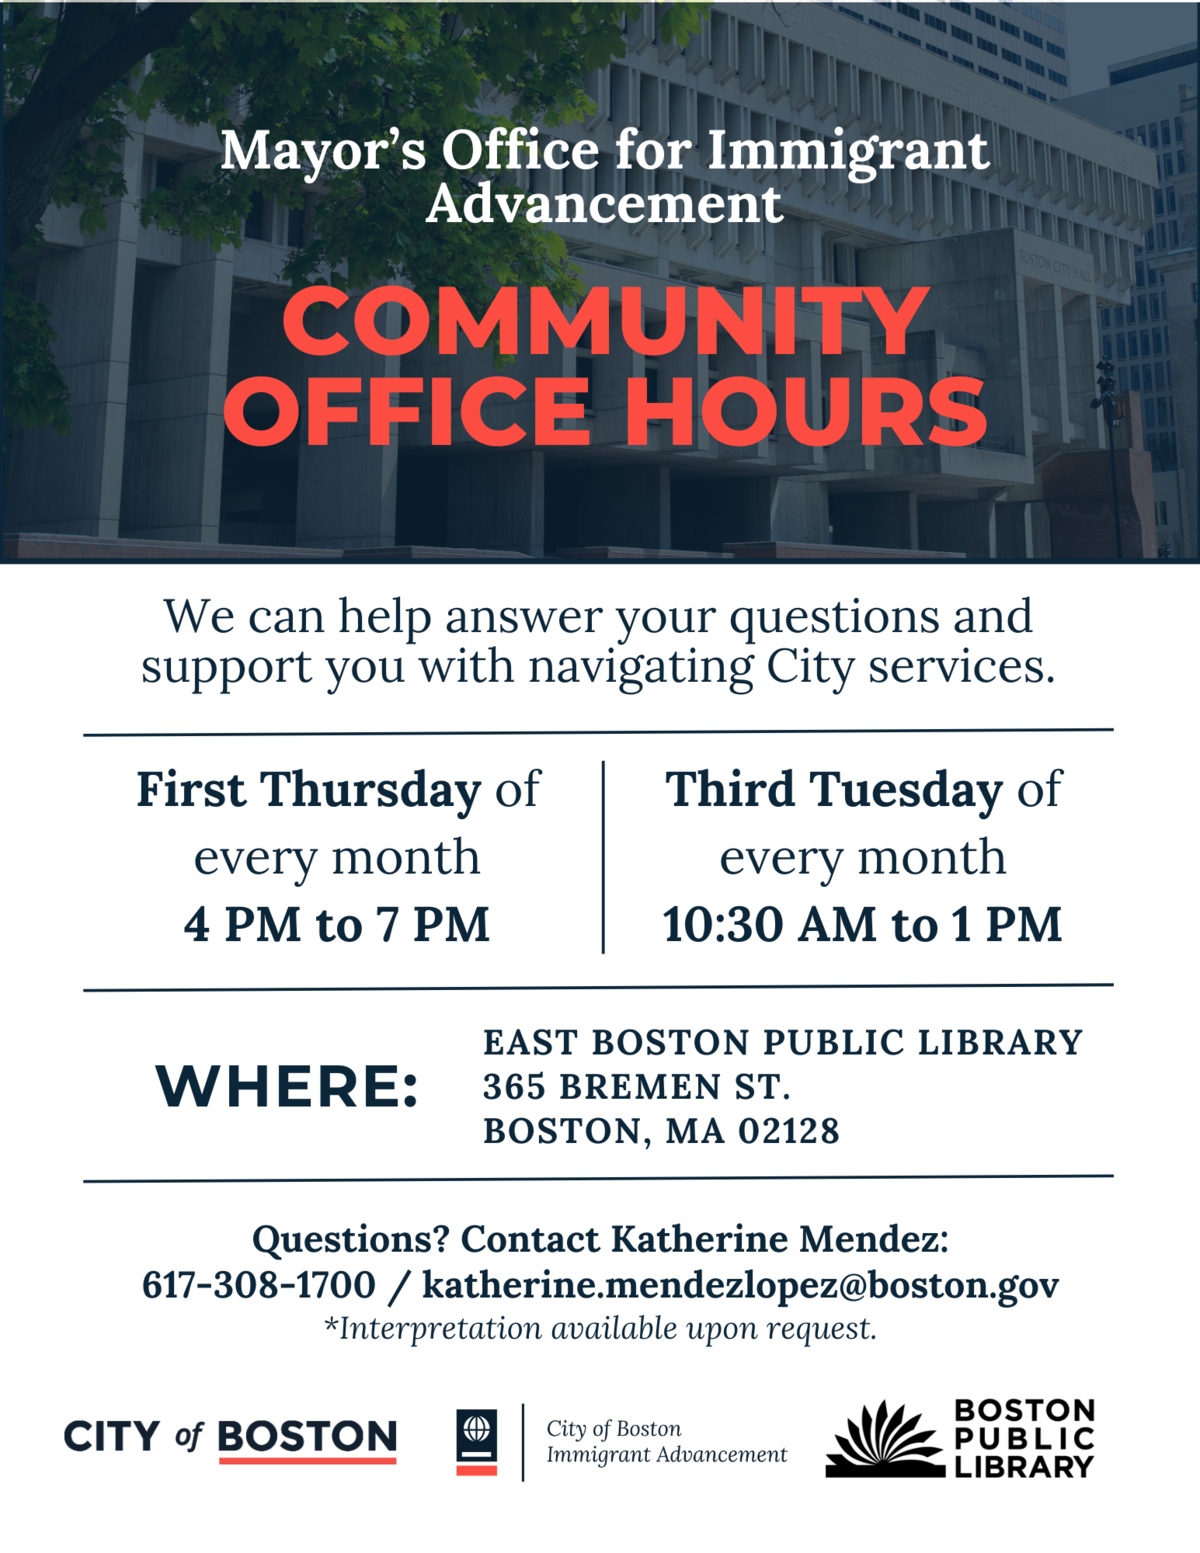 Community office hours flyer